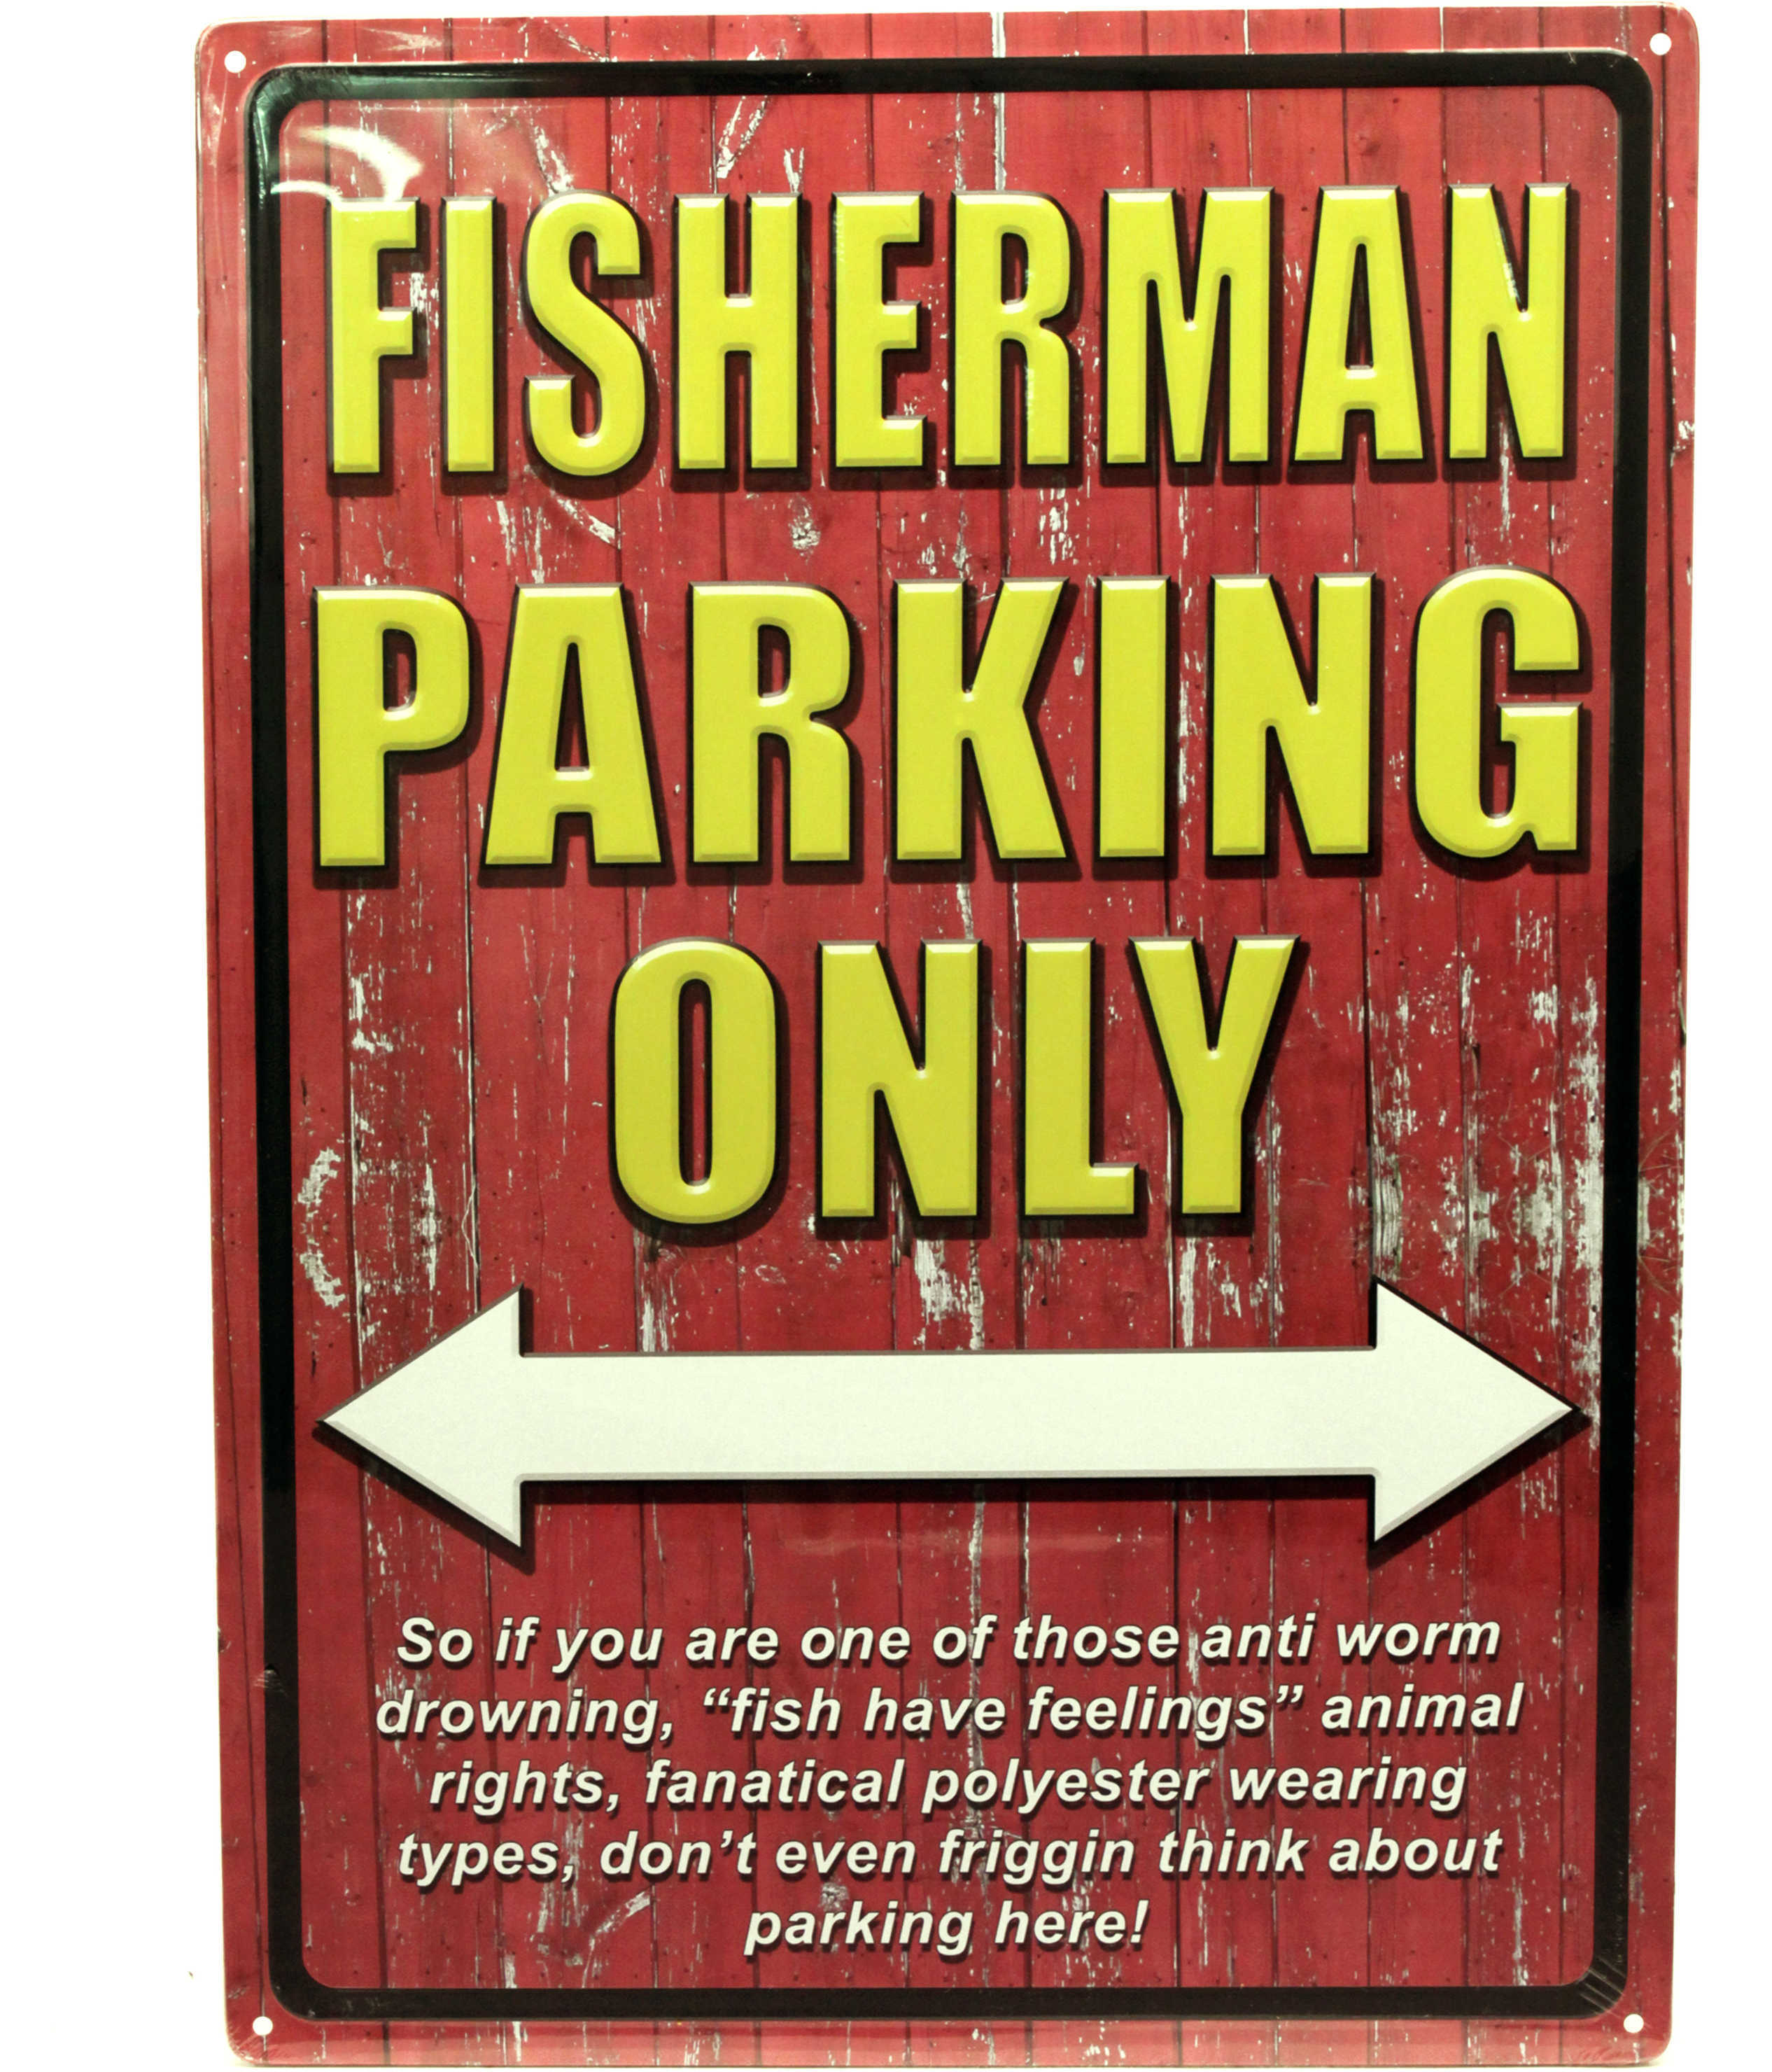 Rivers Edge Products 12" x 17" Tin Sign Fisherman Parking 1521